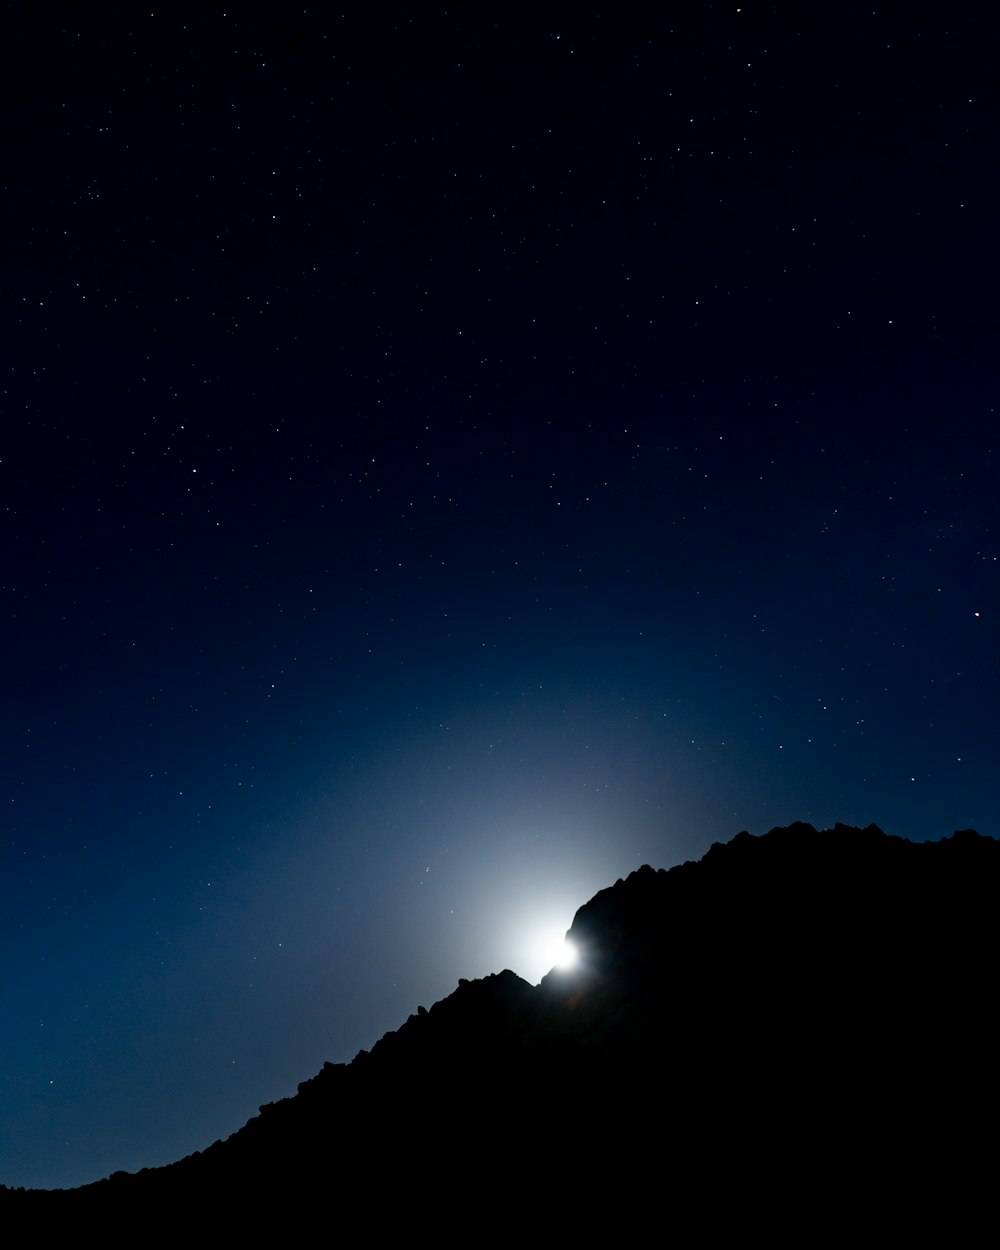 a bright light shines in the night sky above a mountain